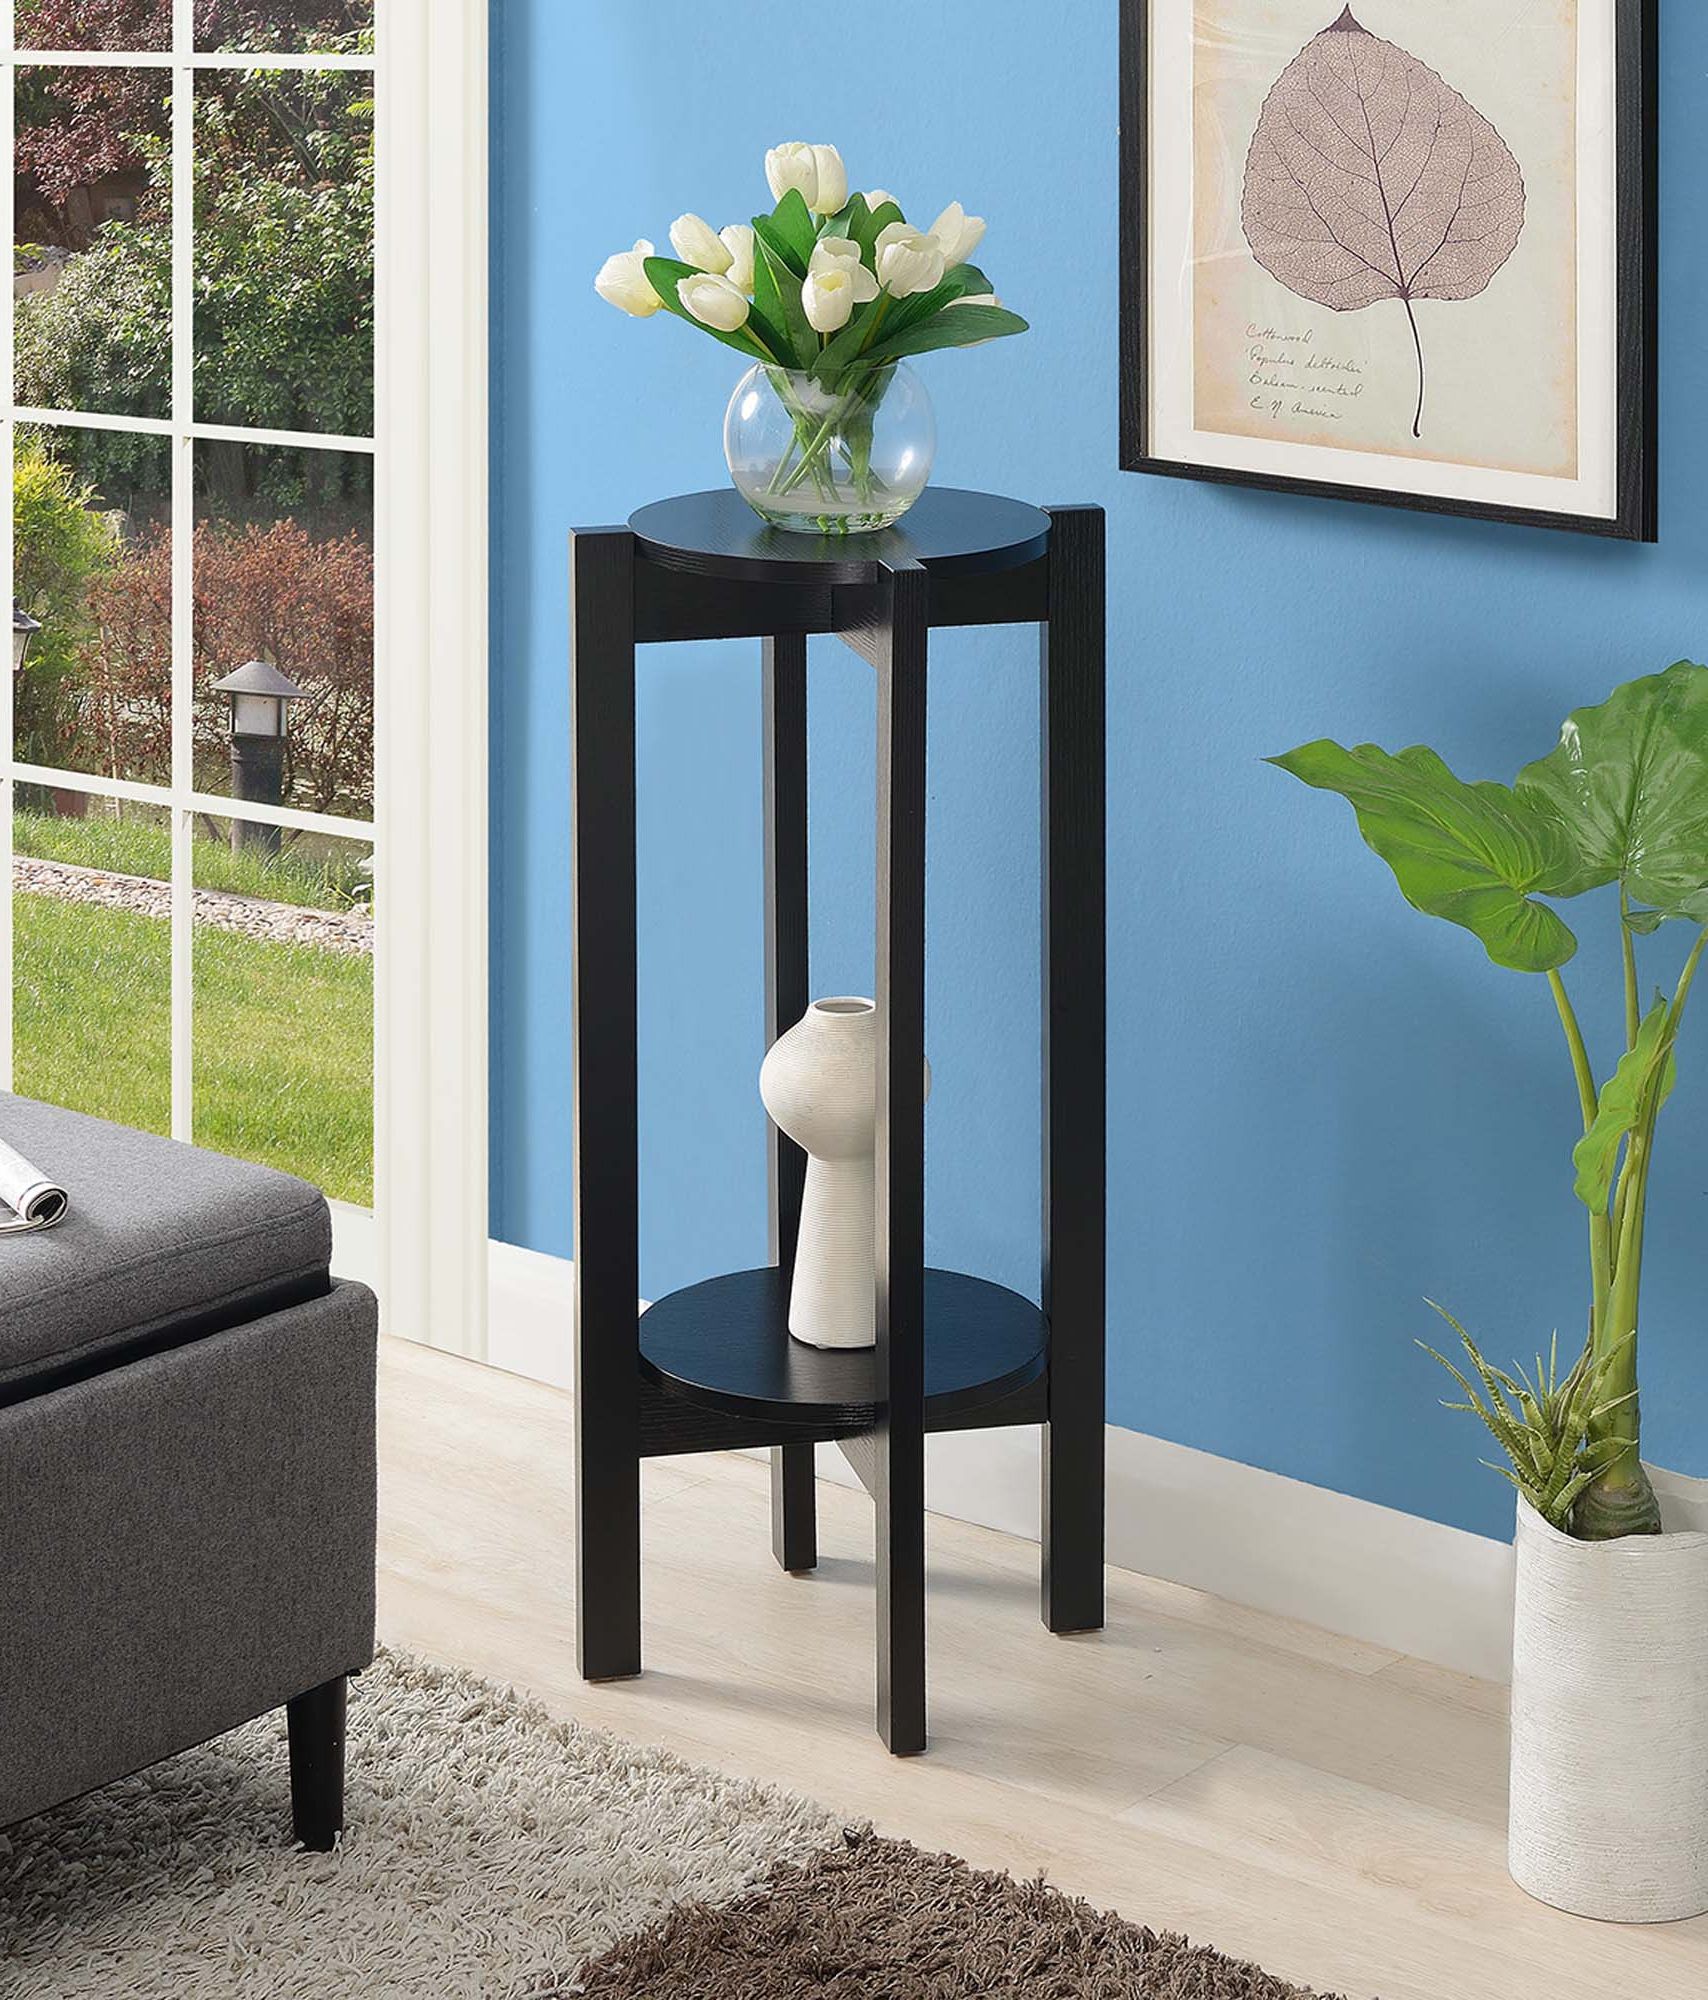 Preferred Deluxe Plant Stands Intended For Convenience Concepts Newport Deluxe 2 Tier Plant Stand, Black – Walmart (View 8 of 15)